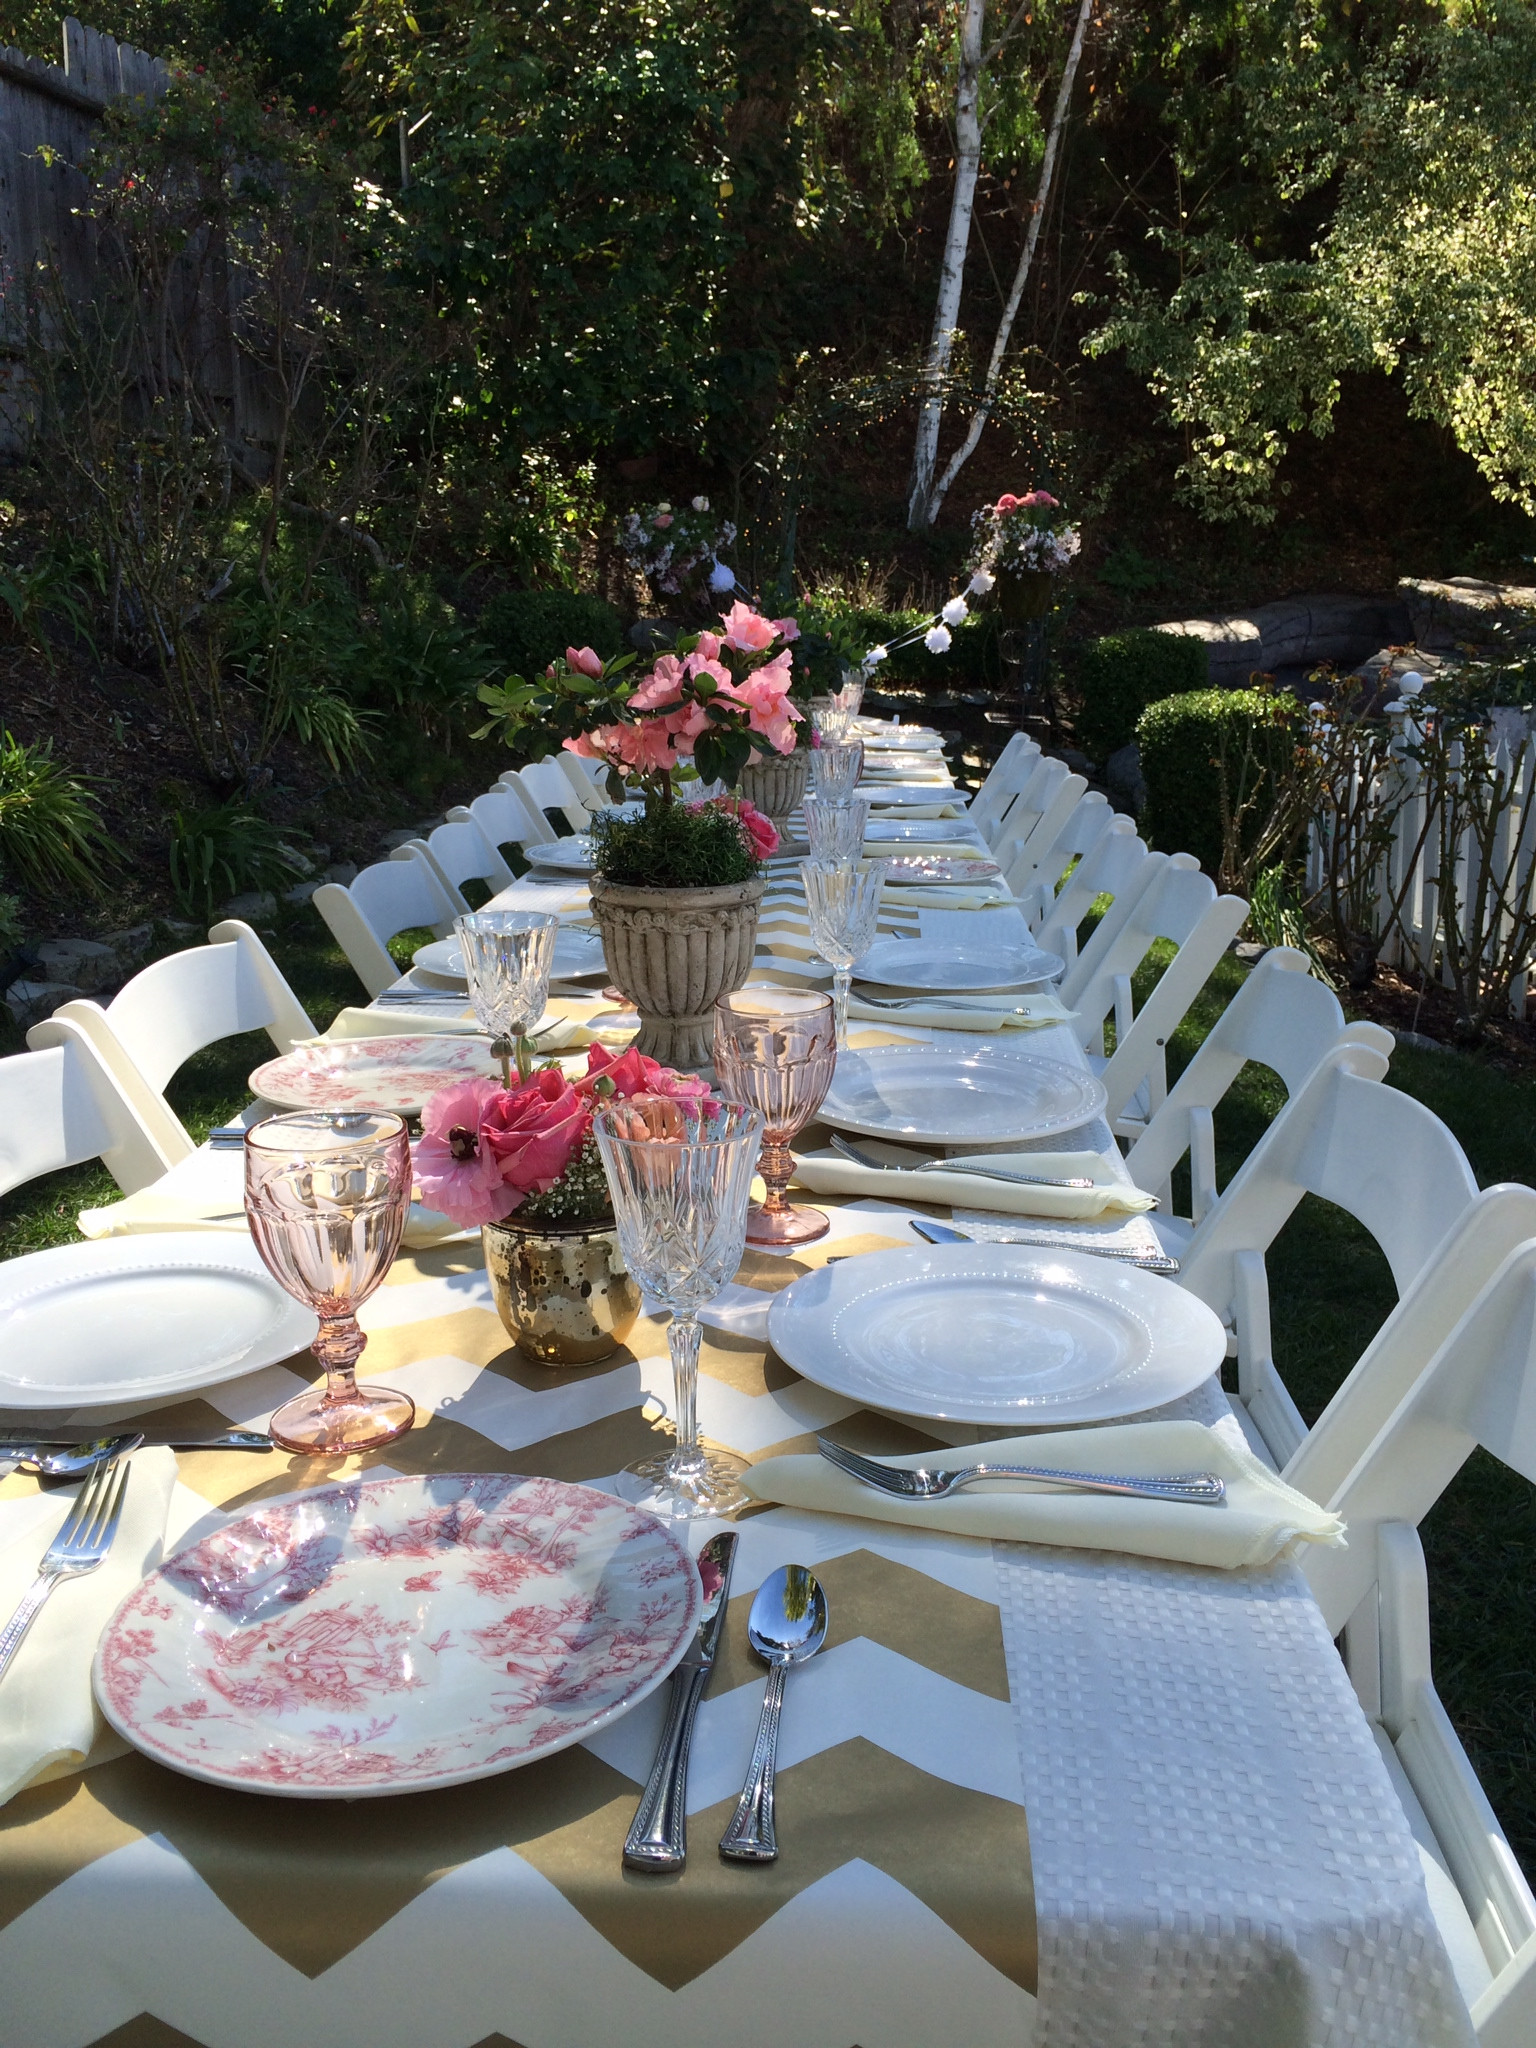 Backyard Tea Party Decorating Ideas
 Tea Anyone Great Tea Party Ideas for All Occasions